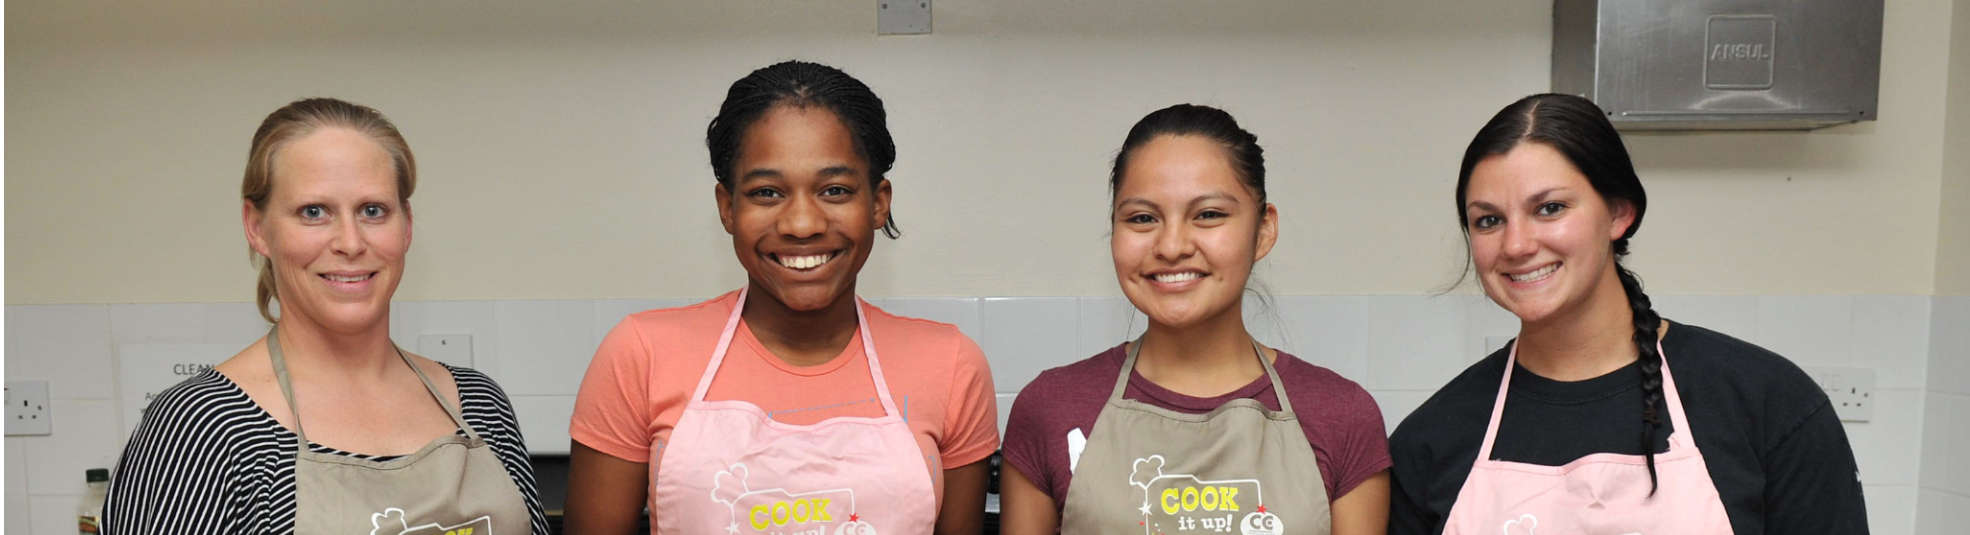 Four women in aprons smiling